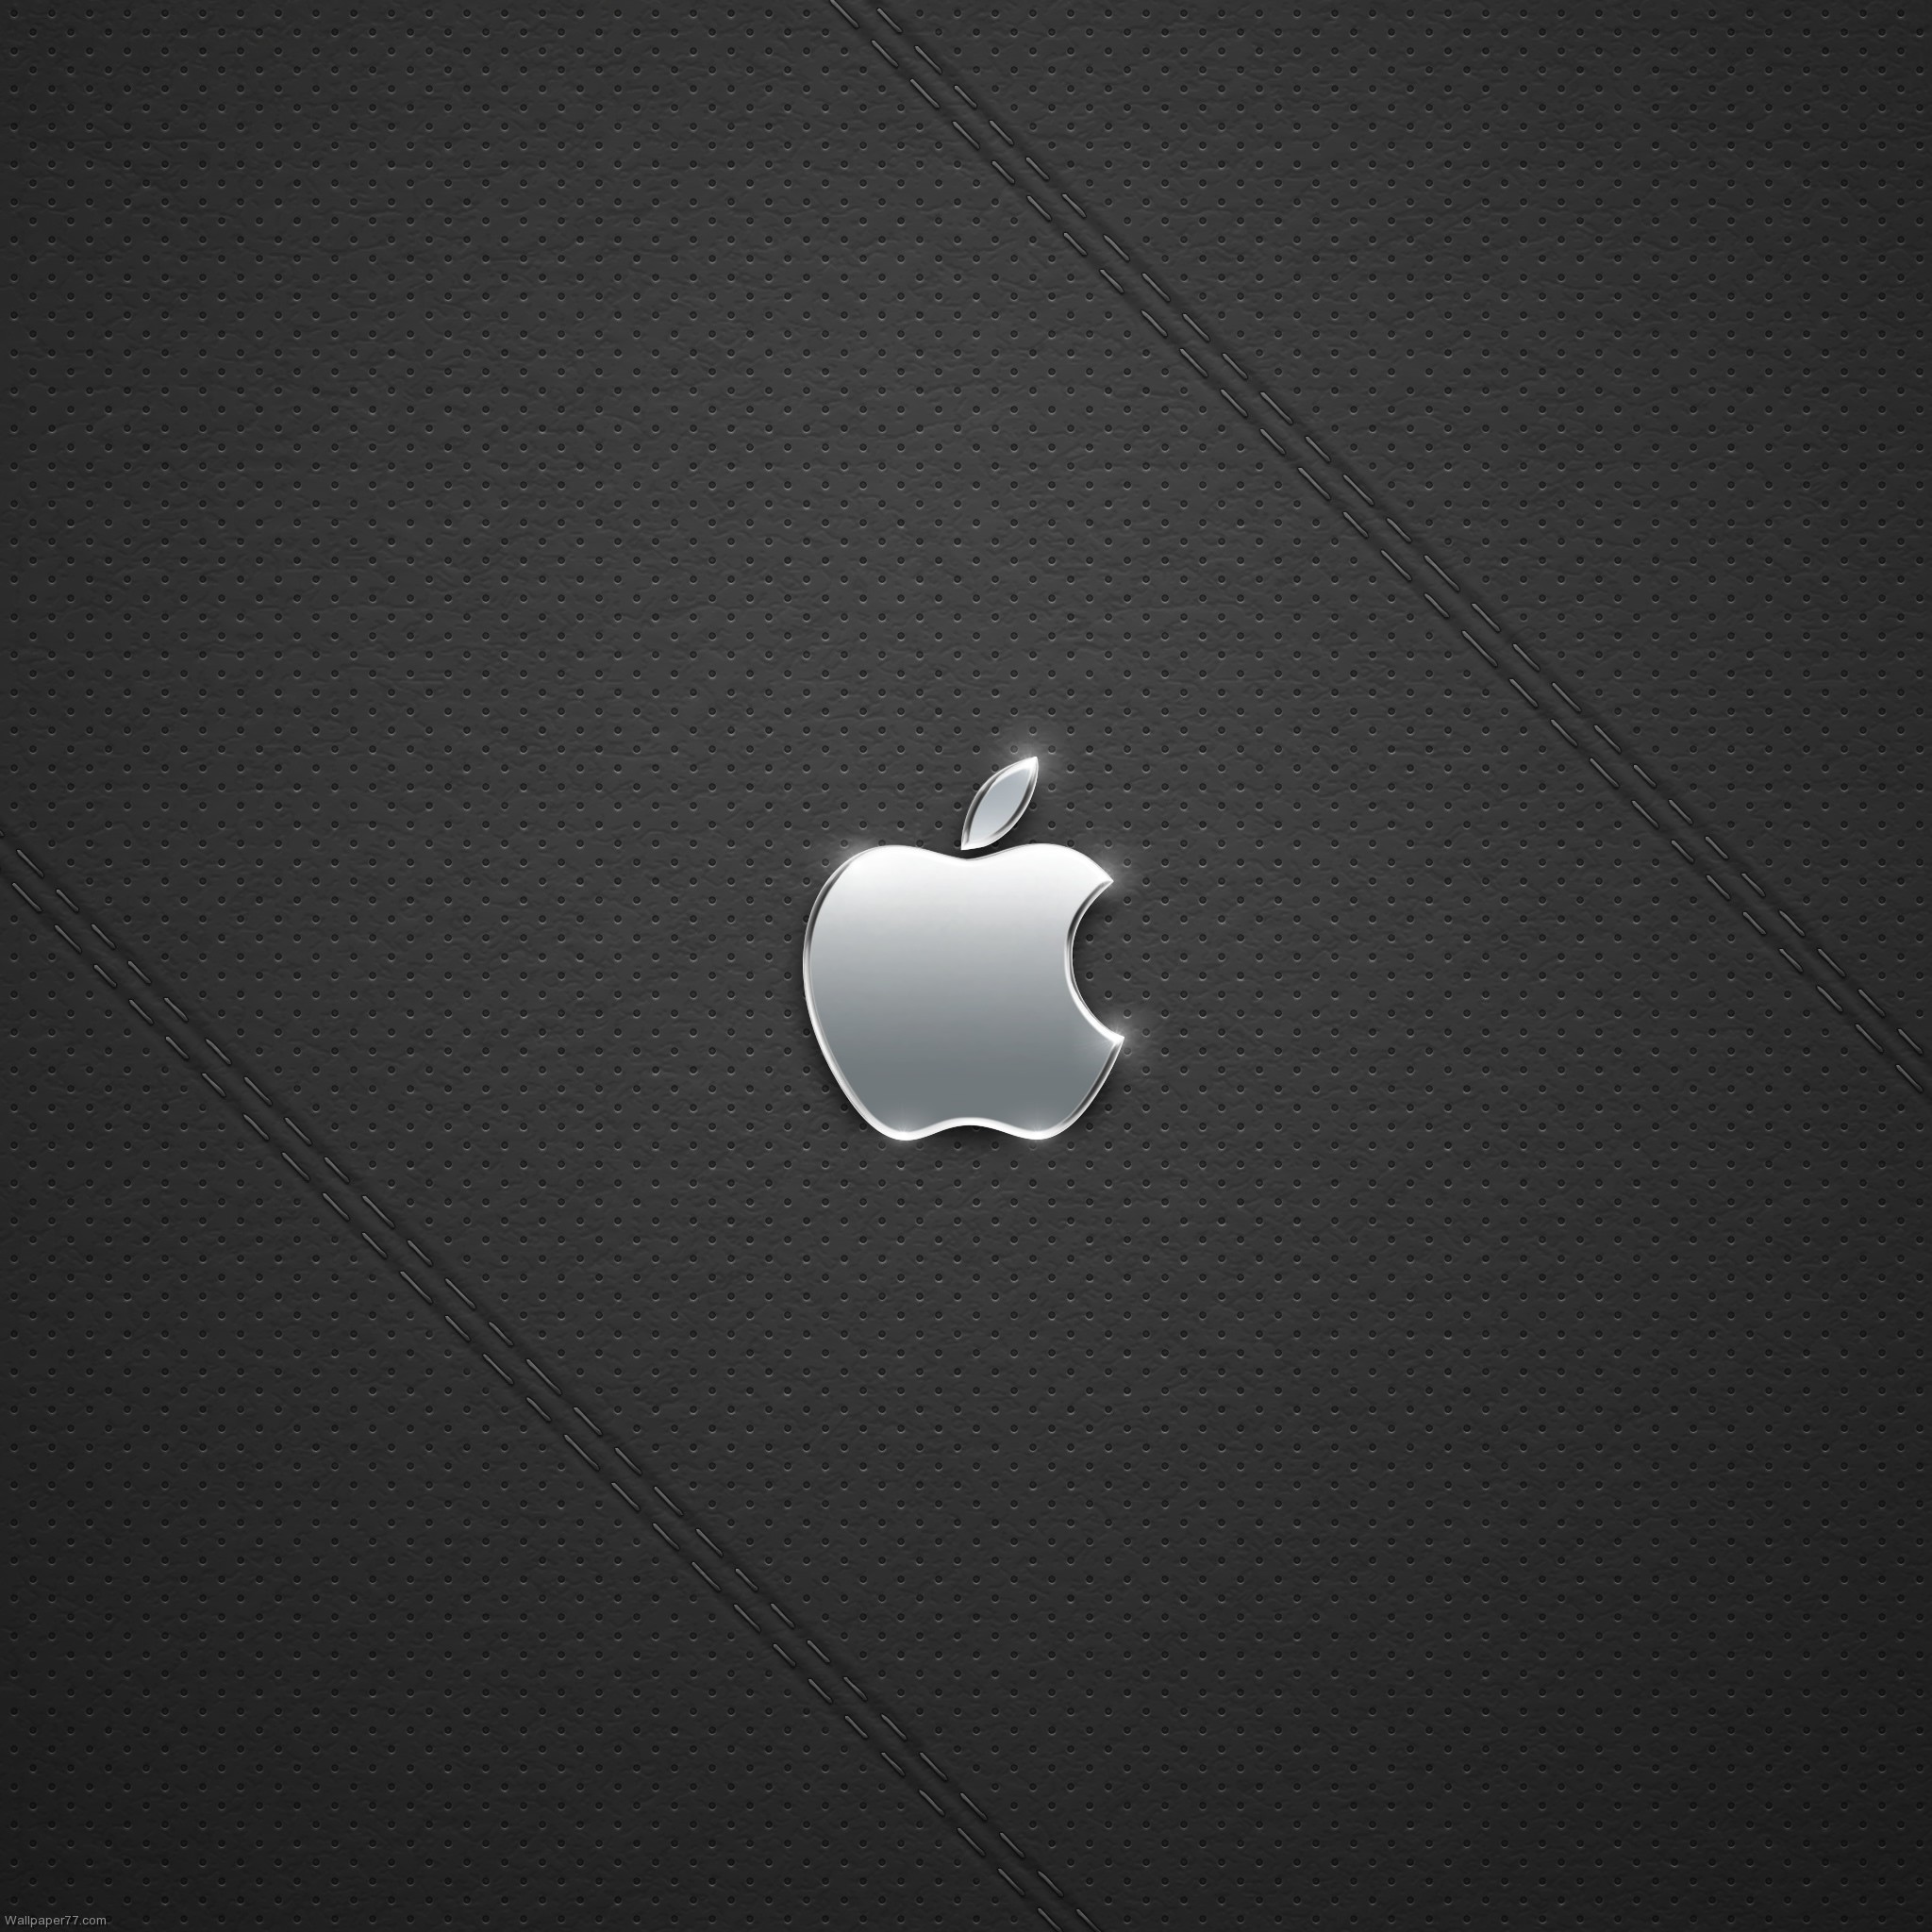 Apple Leather Logo 48x48 Pixels Wallpapers ged Apple Wallpapers Computer Wallpapers Ipad 3 Wallpaper Ipad Wallpaper Mac Wallpapers Retina Display Wallpaper The New Ipad Wallpaper Ipad タブレット壁紙ギャラリー